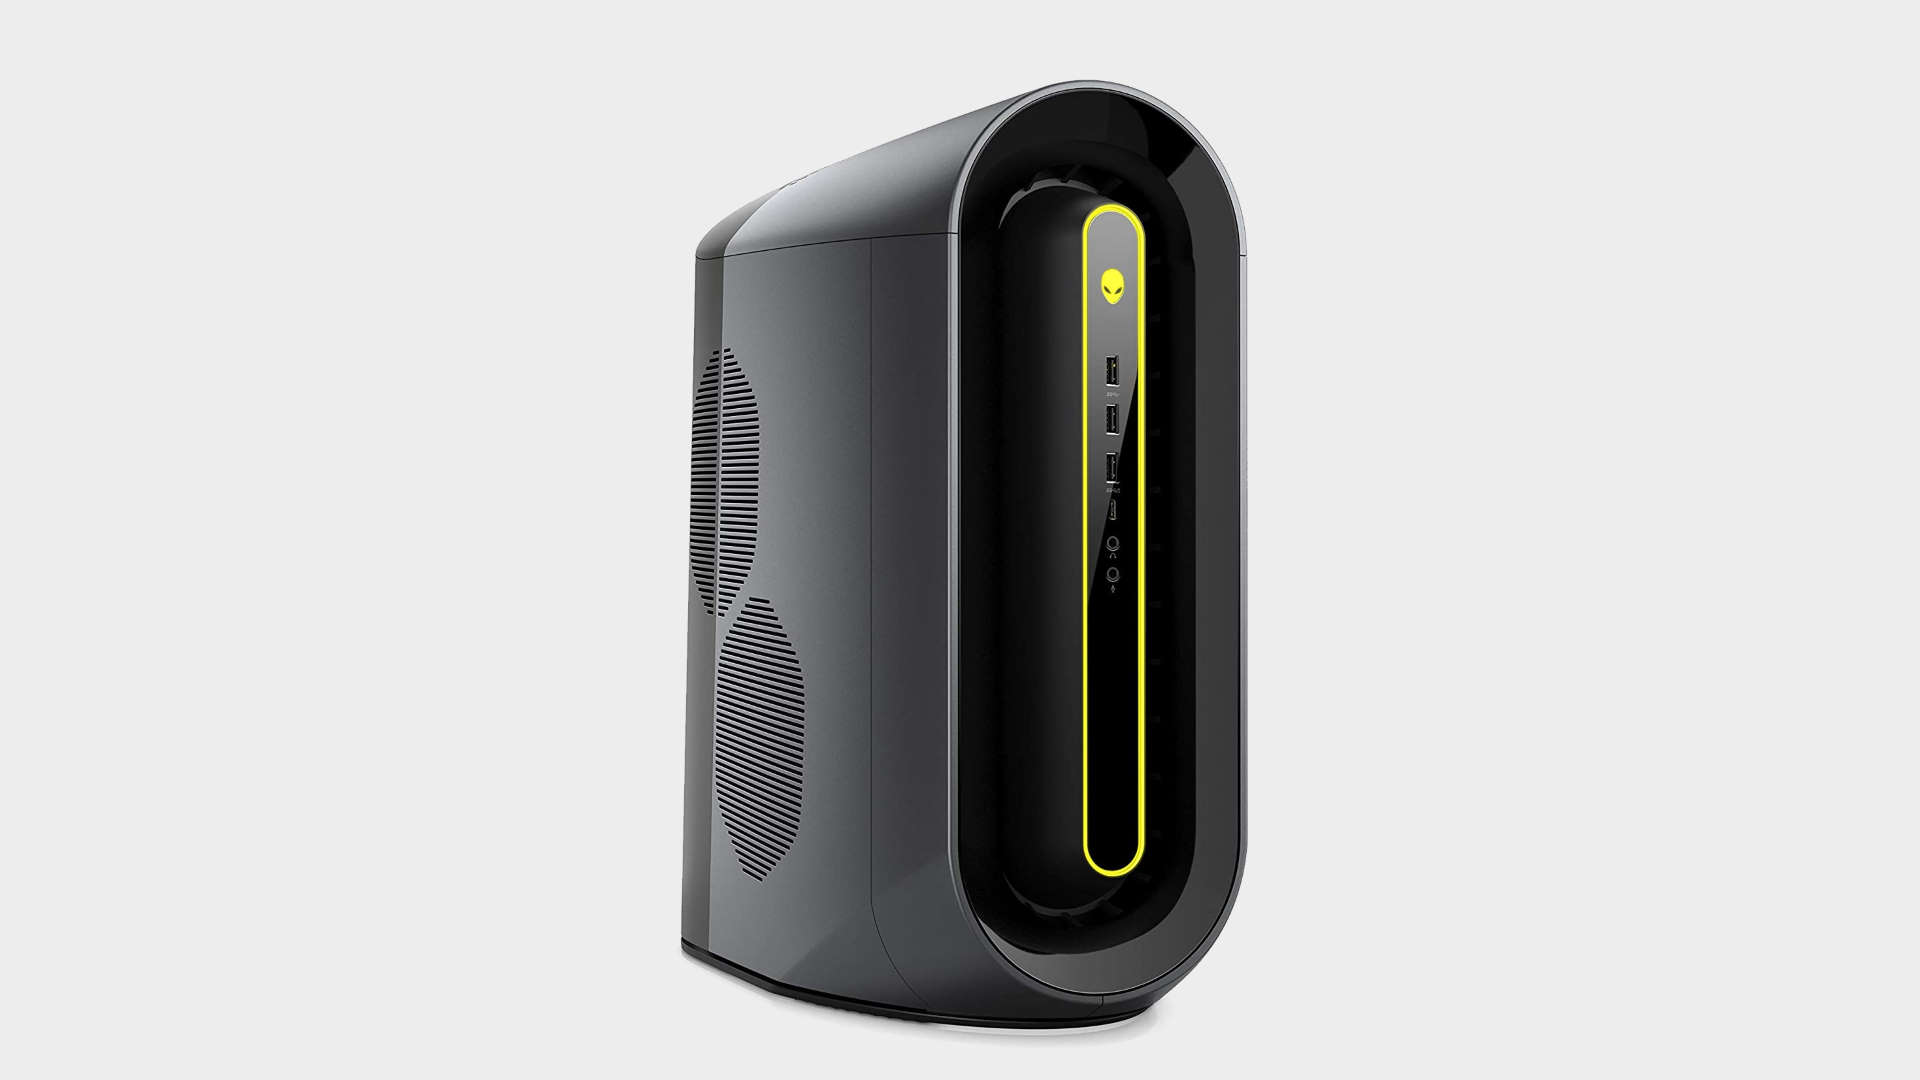 Black Alienware Aurora R10 gaming PC pictured front-on